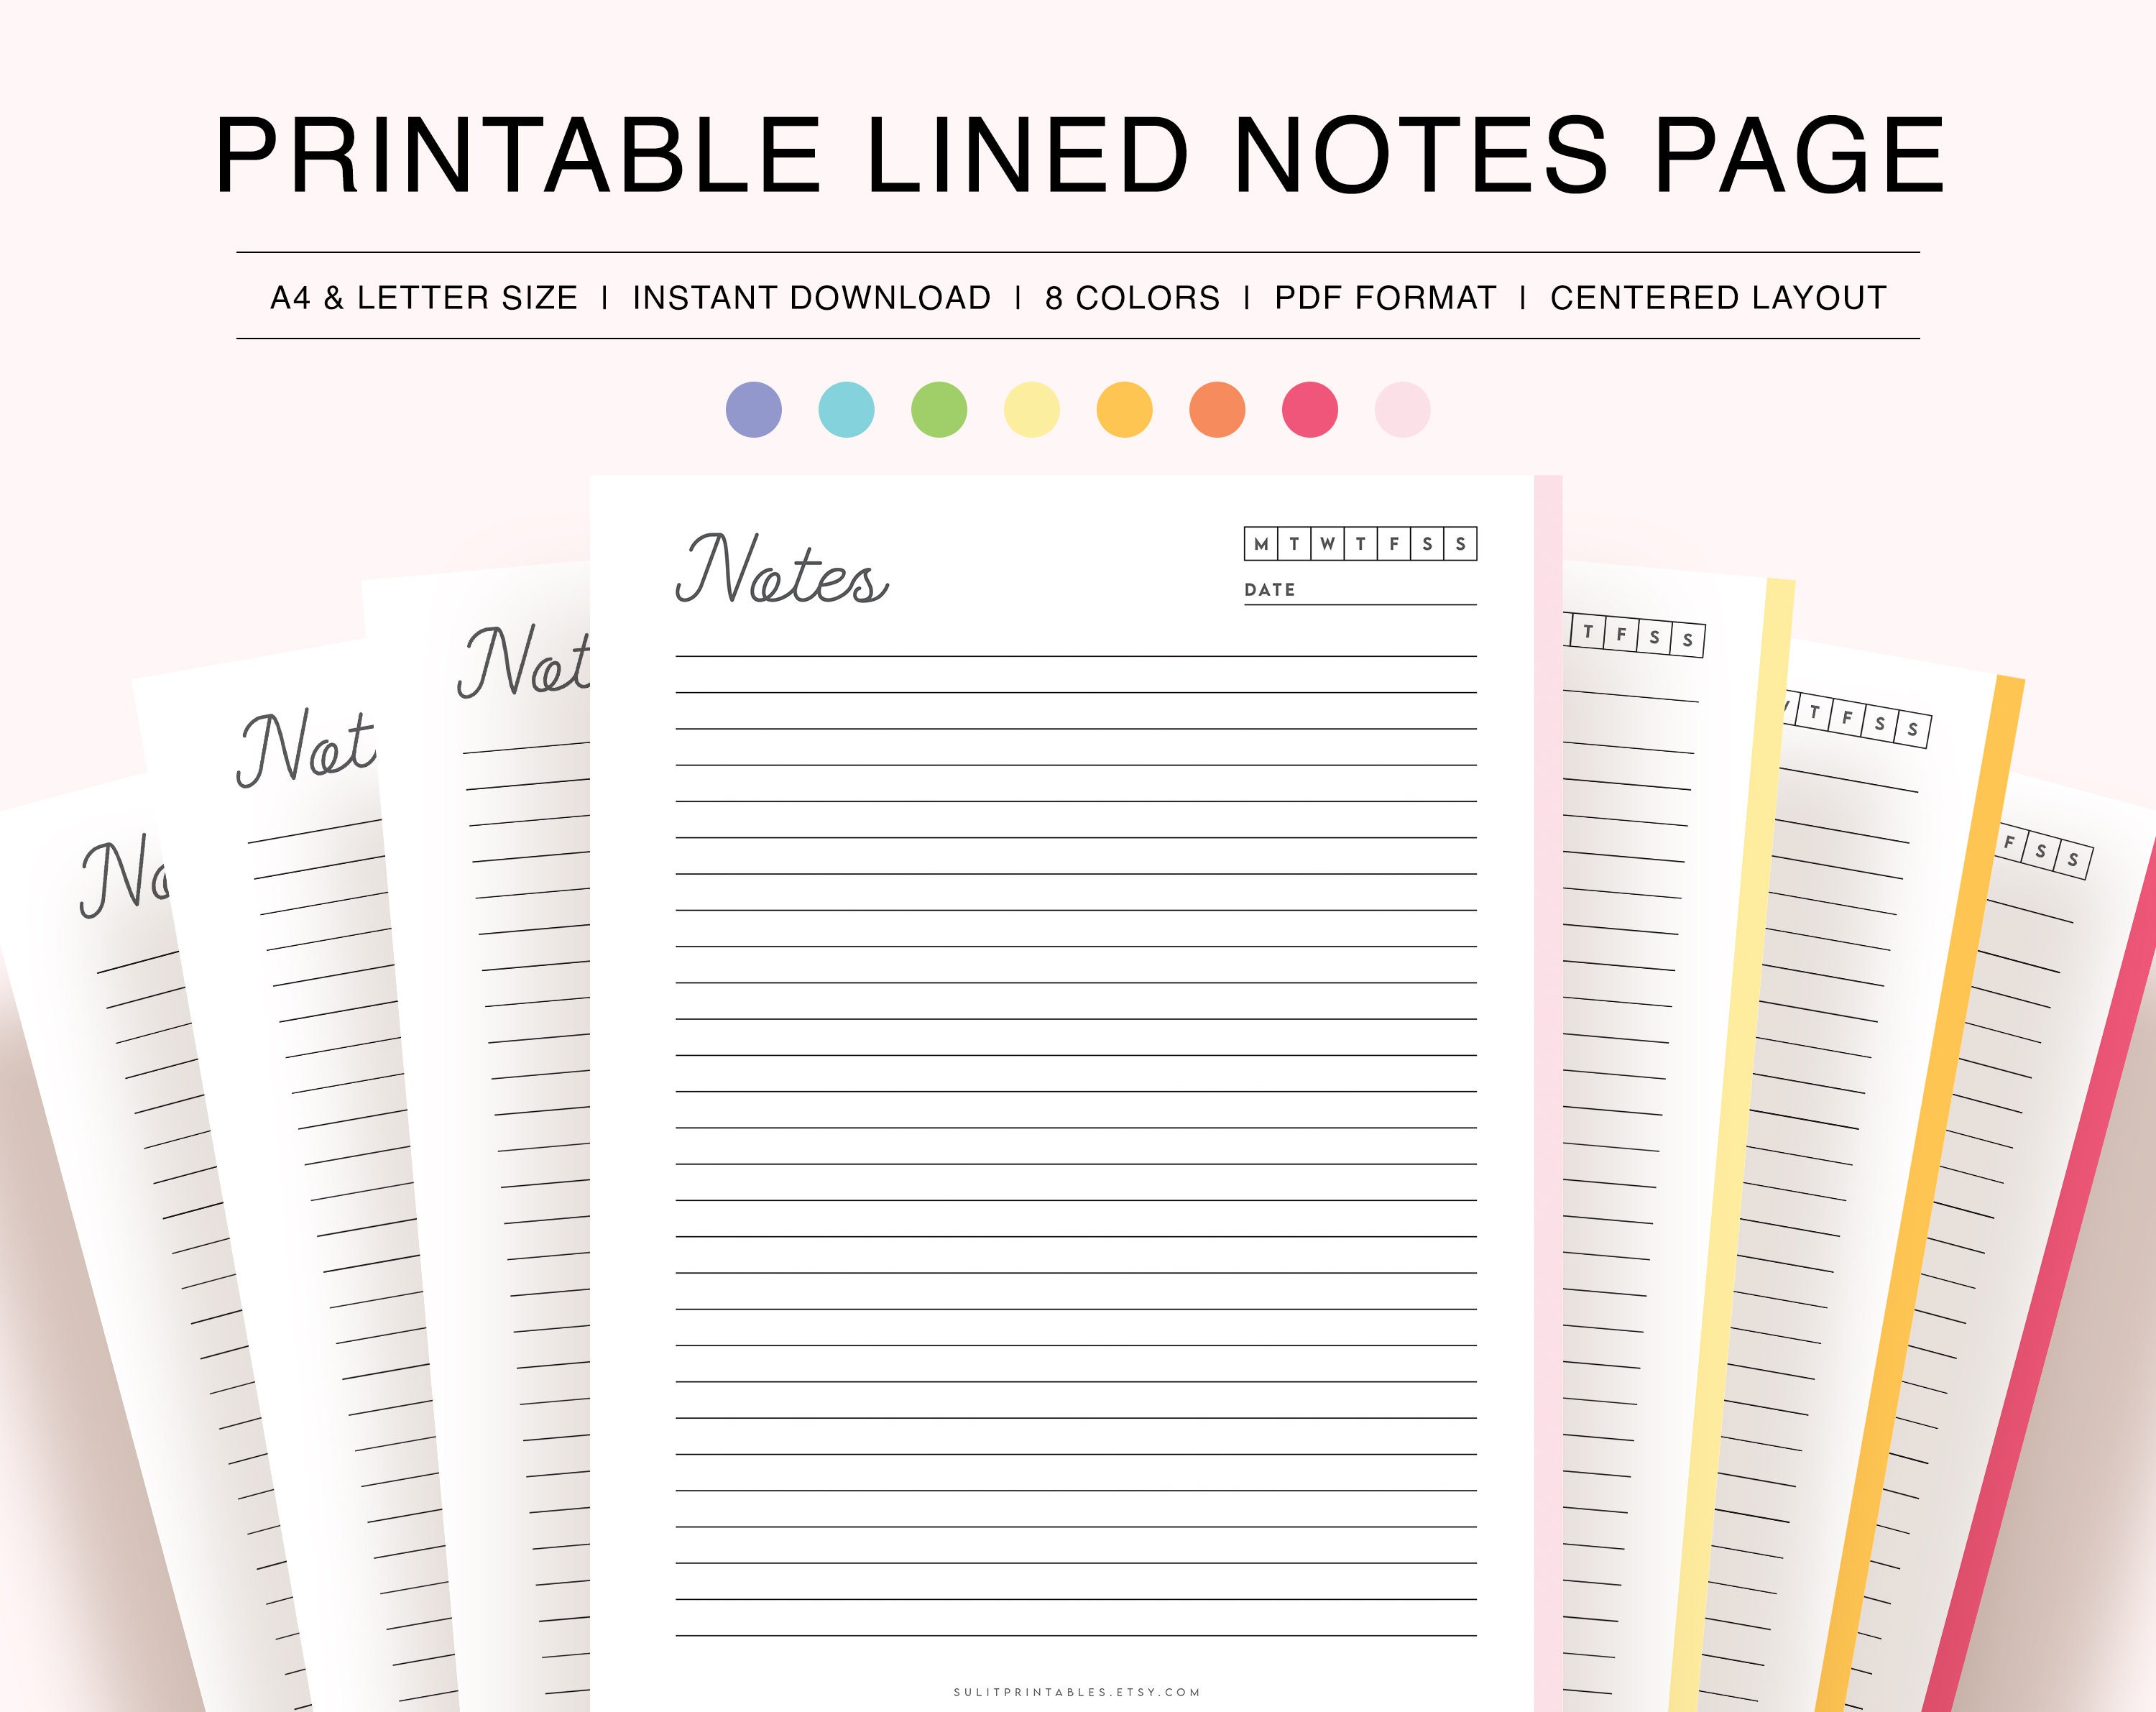 printable-lined-notes-printable-notes-page-printable-notes-etsy-uk